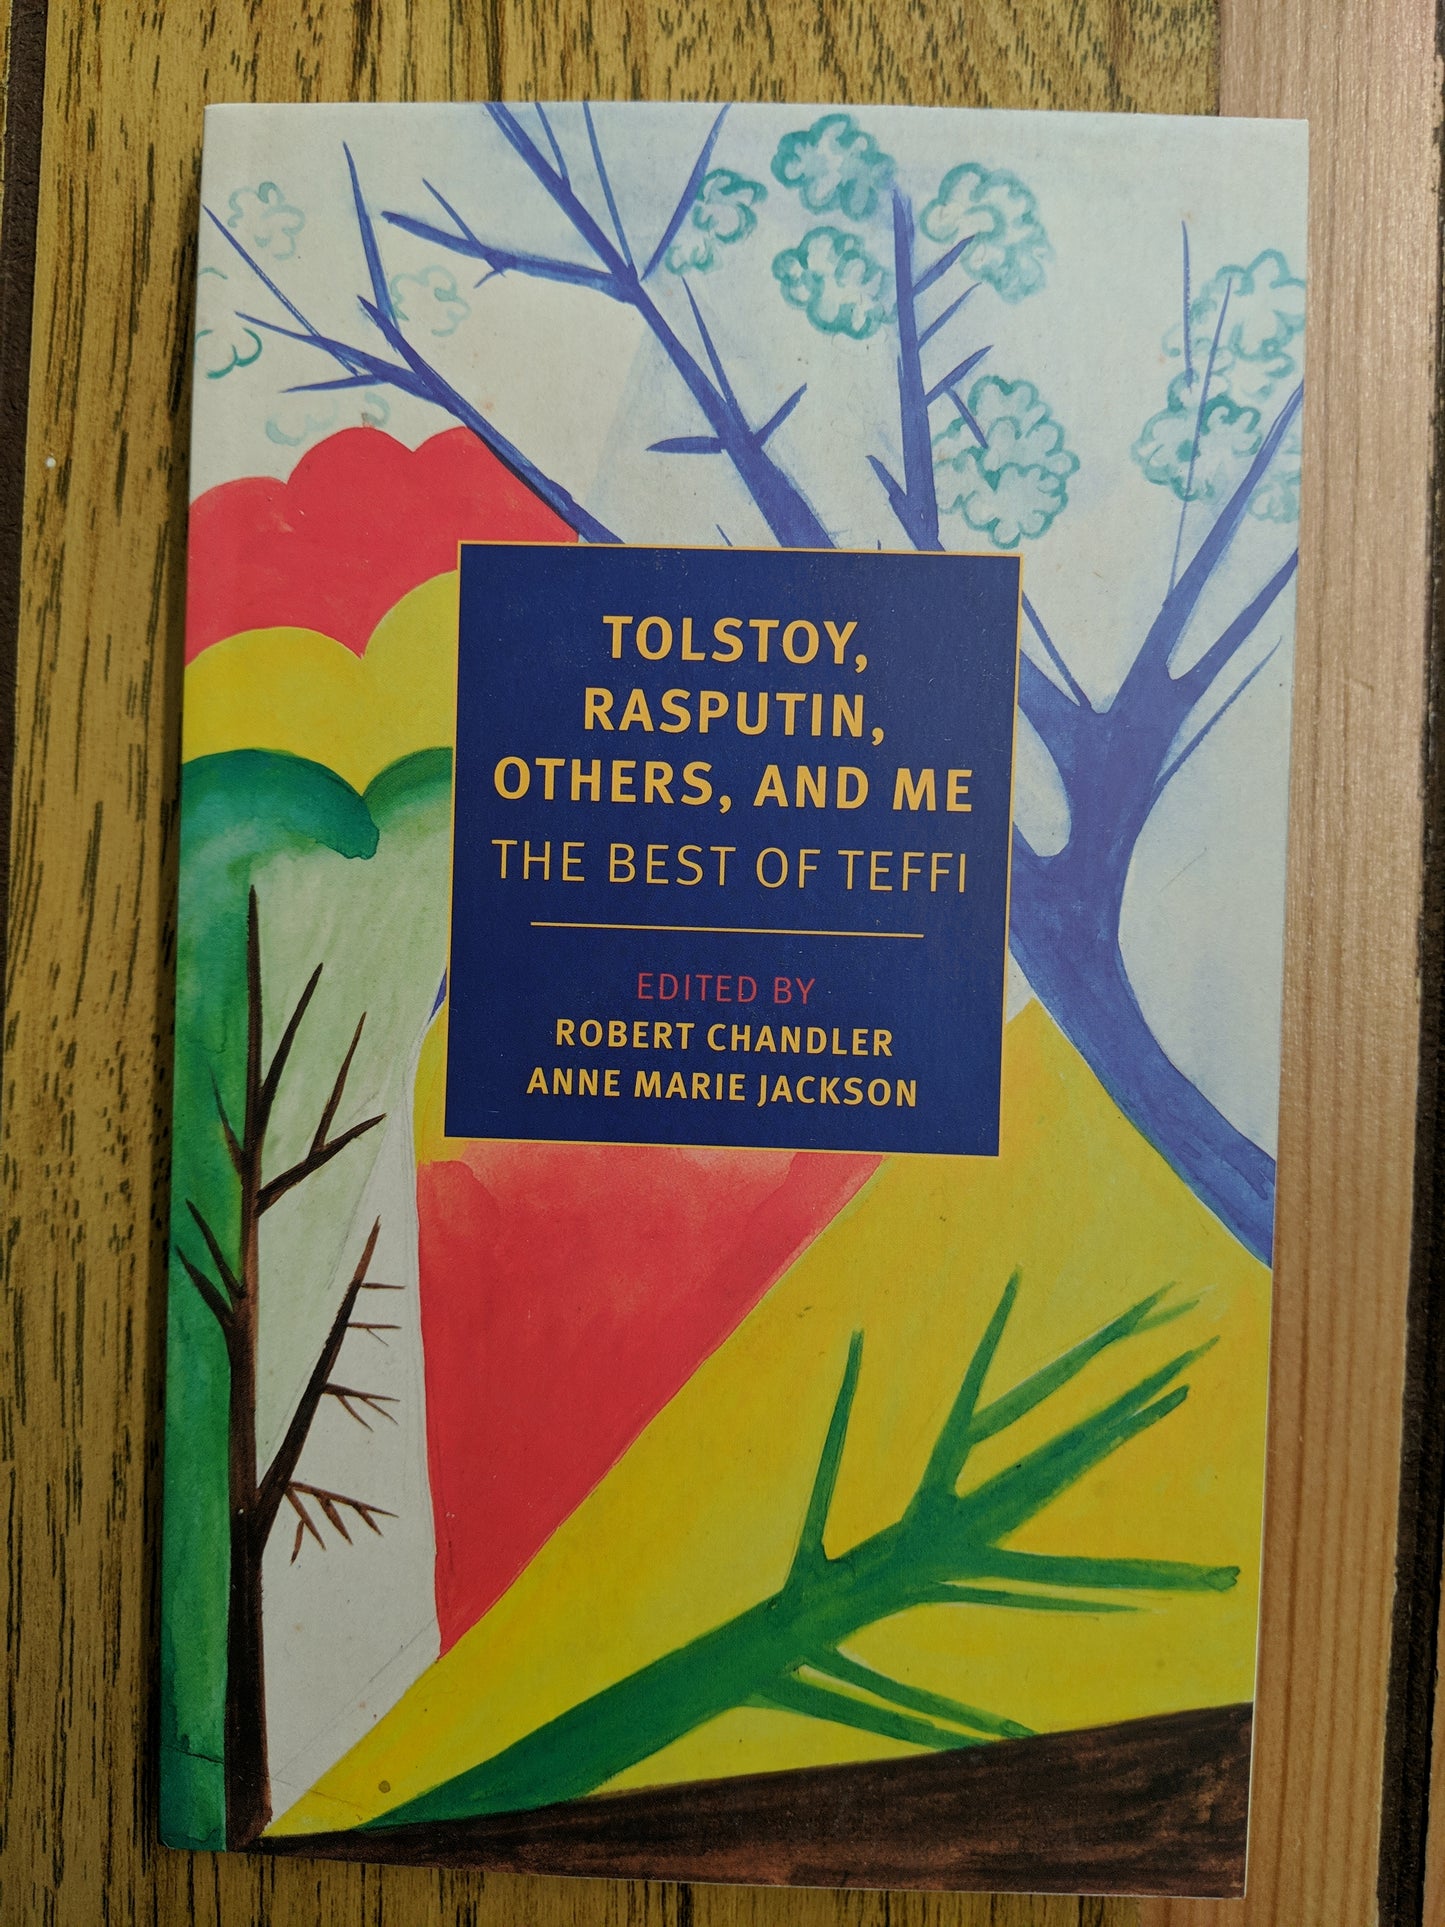 Tolstoy, Rasputin, Others, and Me: The Best of Teffi